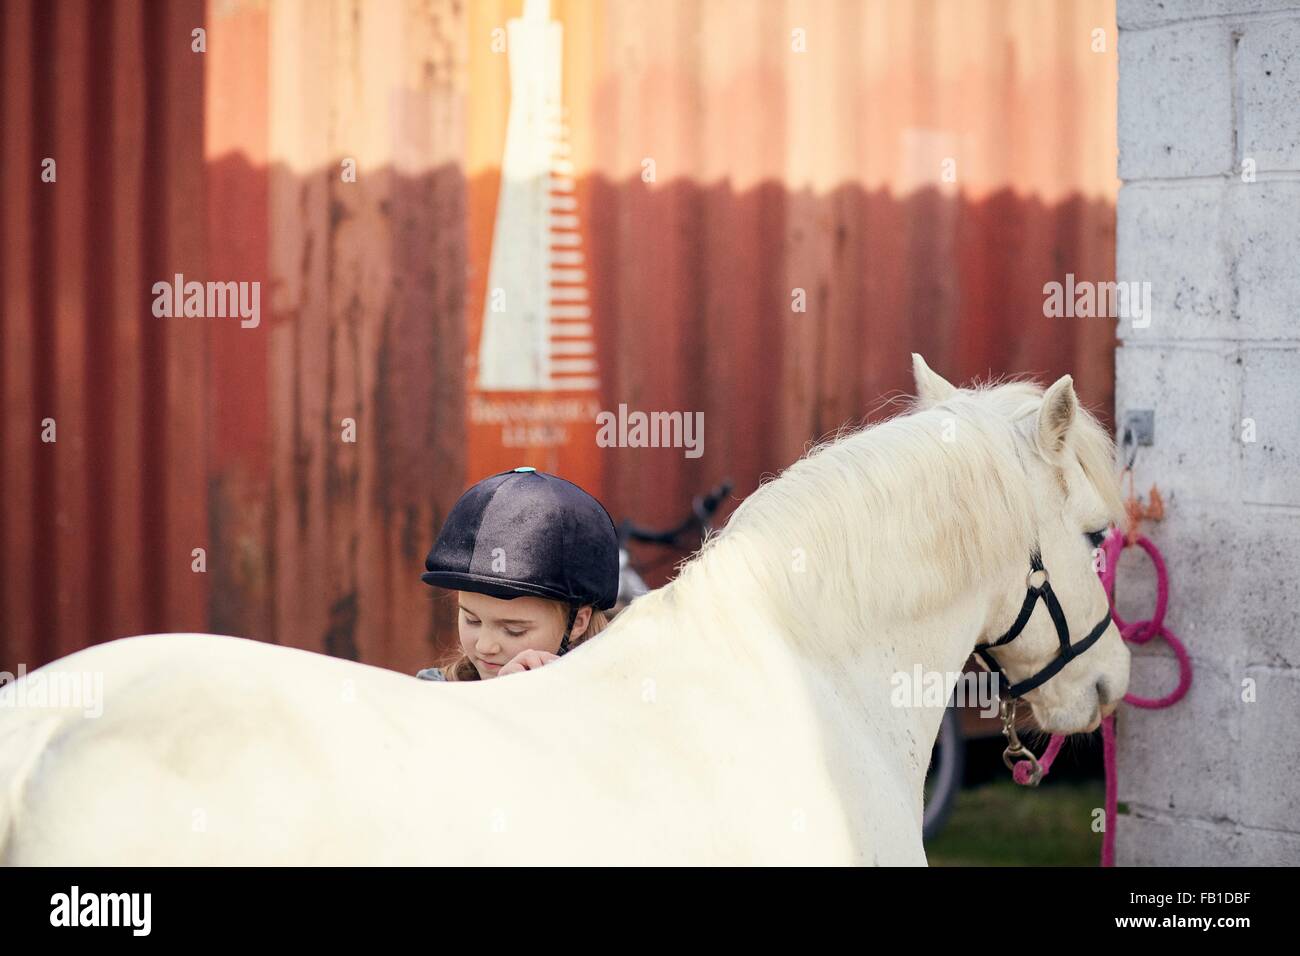 Girl grooming pony at stable Stock Photo